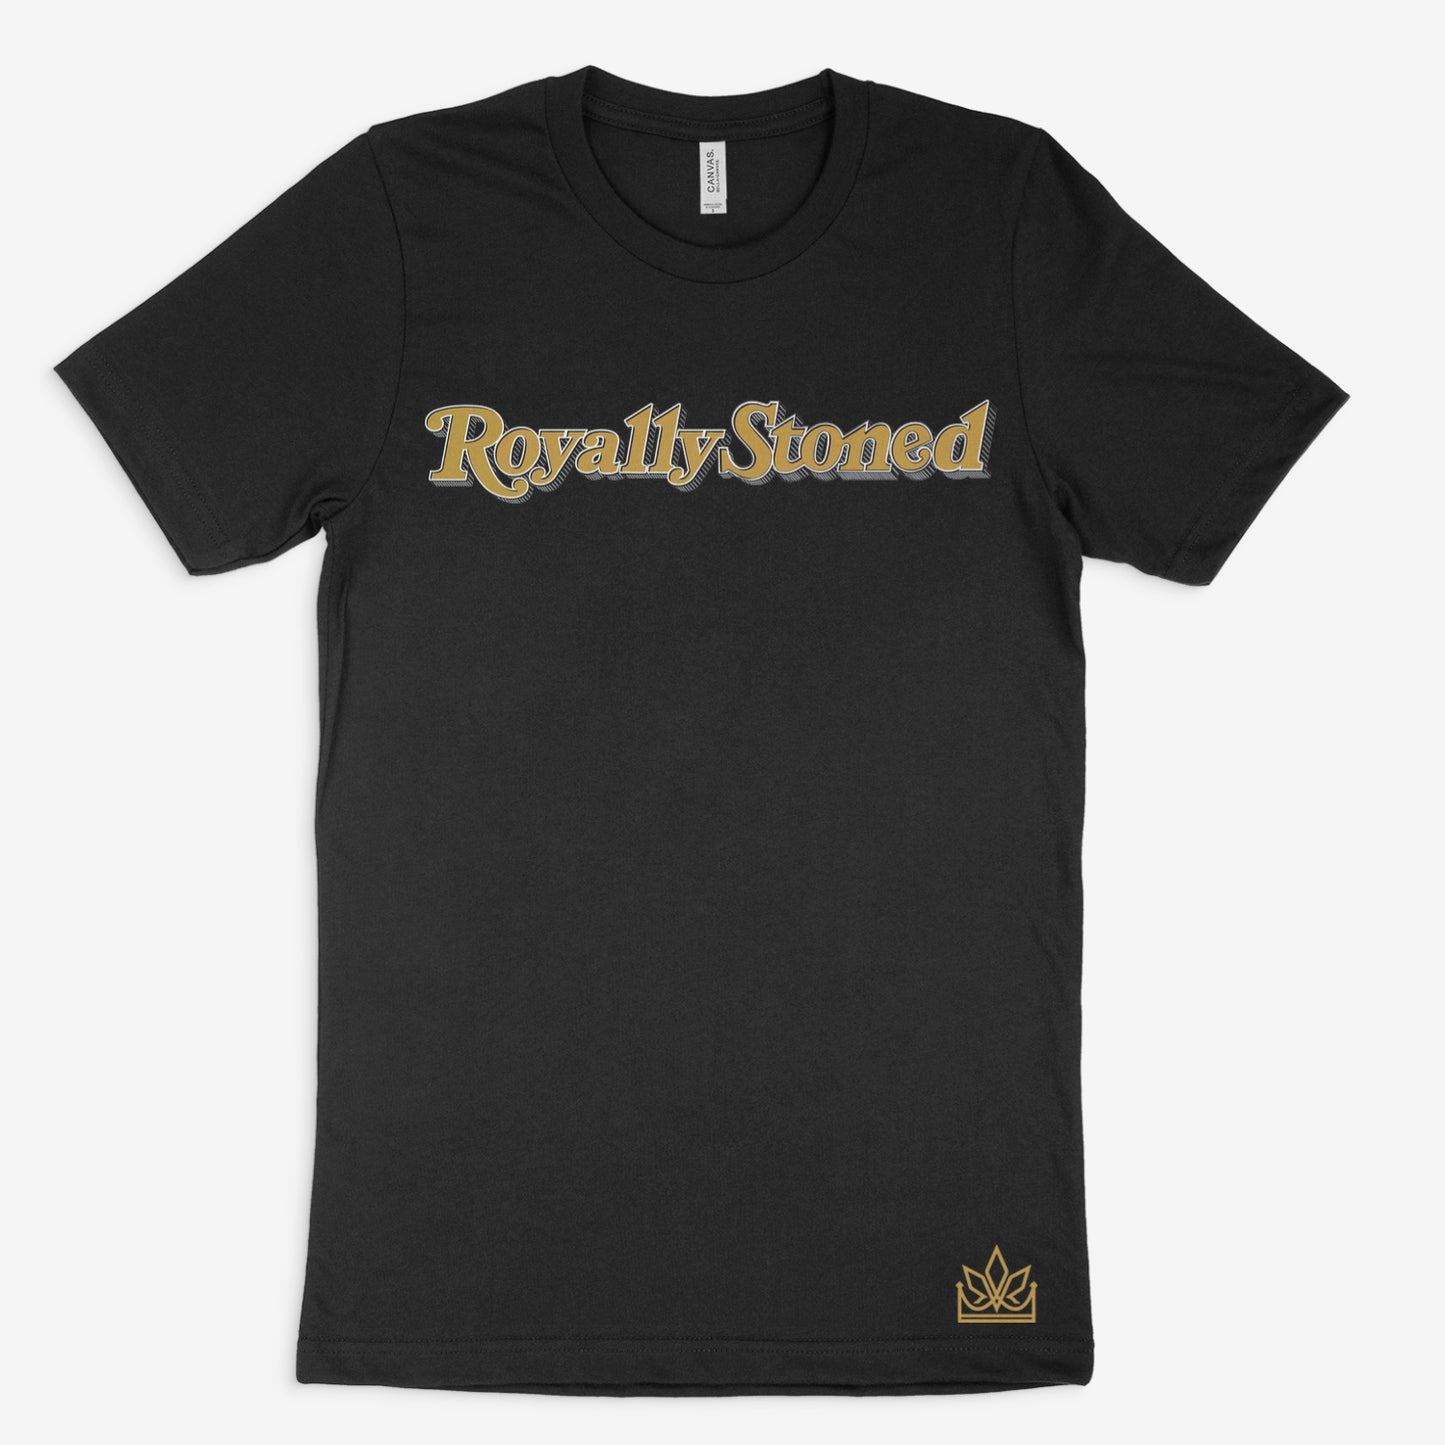 Royally Stoned Tee - Vintage Gold